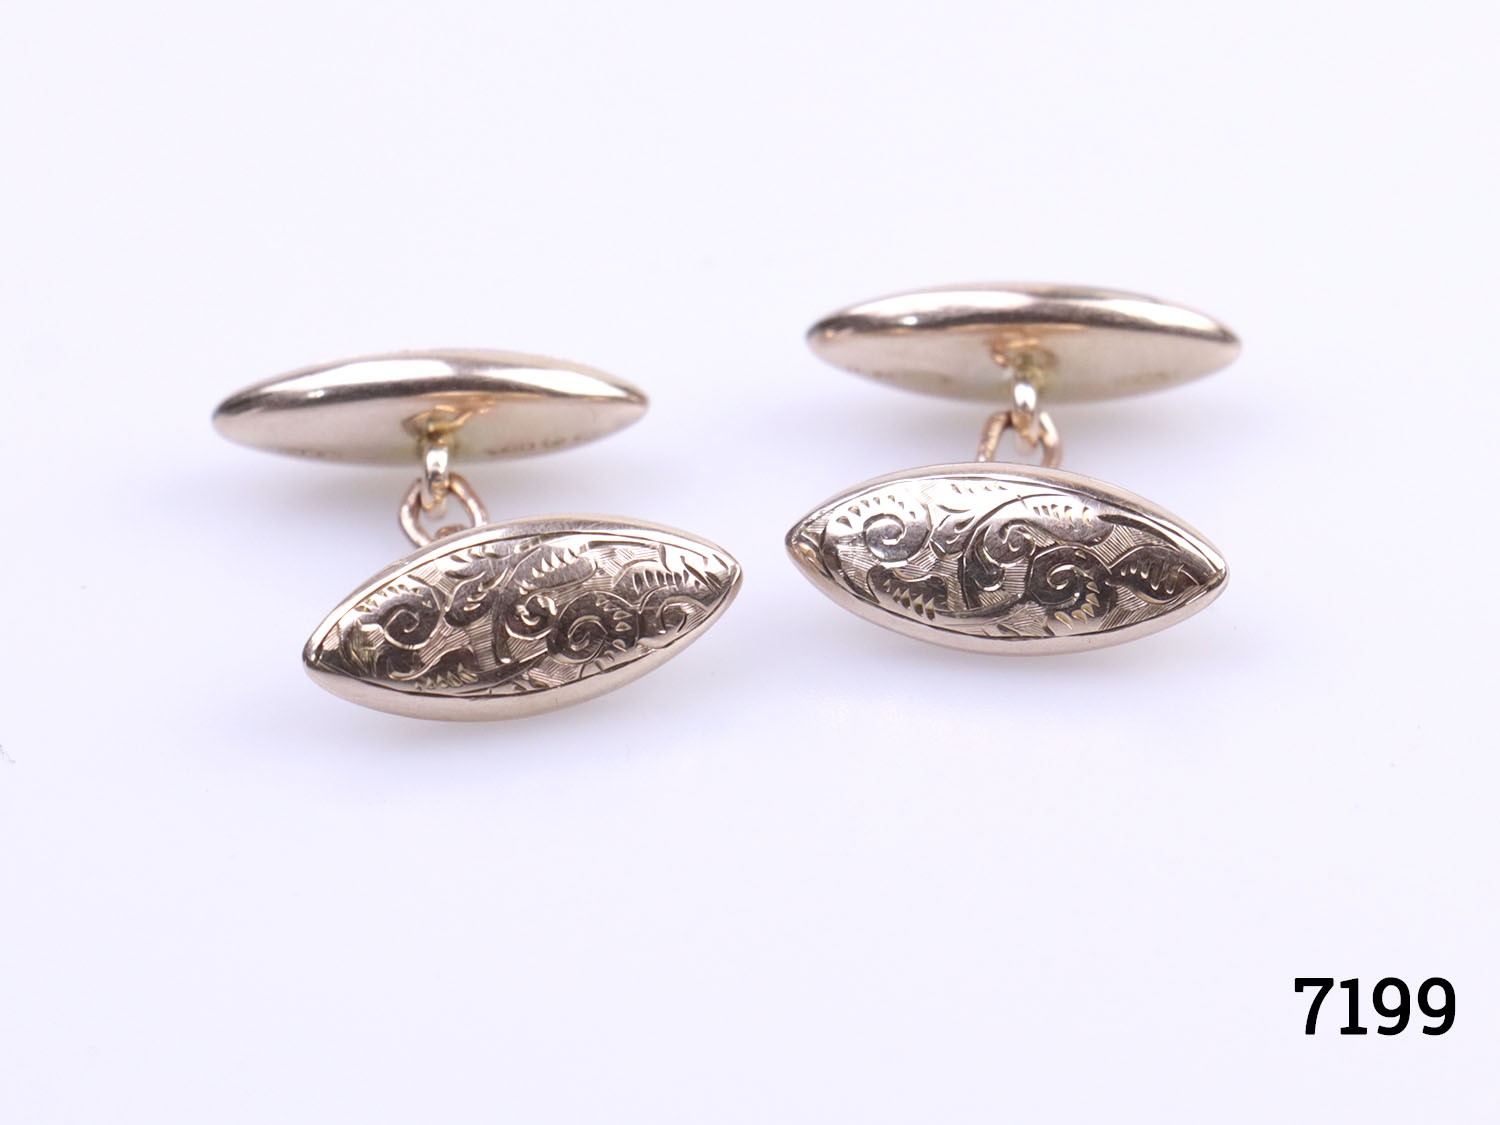 Vintage 9 karat gold oval cufflinks. Scrollwork design and hallmark on both ends and also hallmarked on each link of the chain. London assayed. Each end measures 20mm by 6mm with 24mm in length. Main photo showing one side of the scrollwork ends